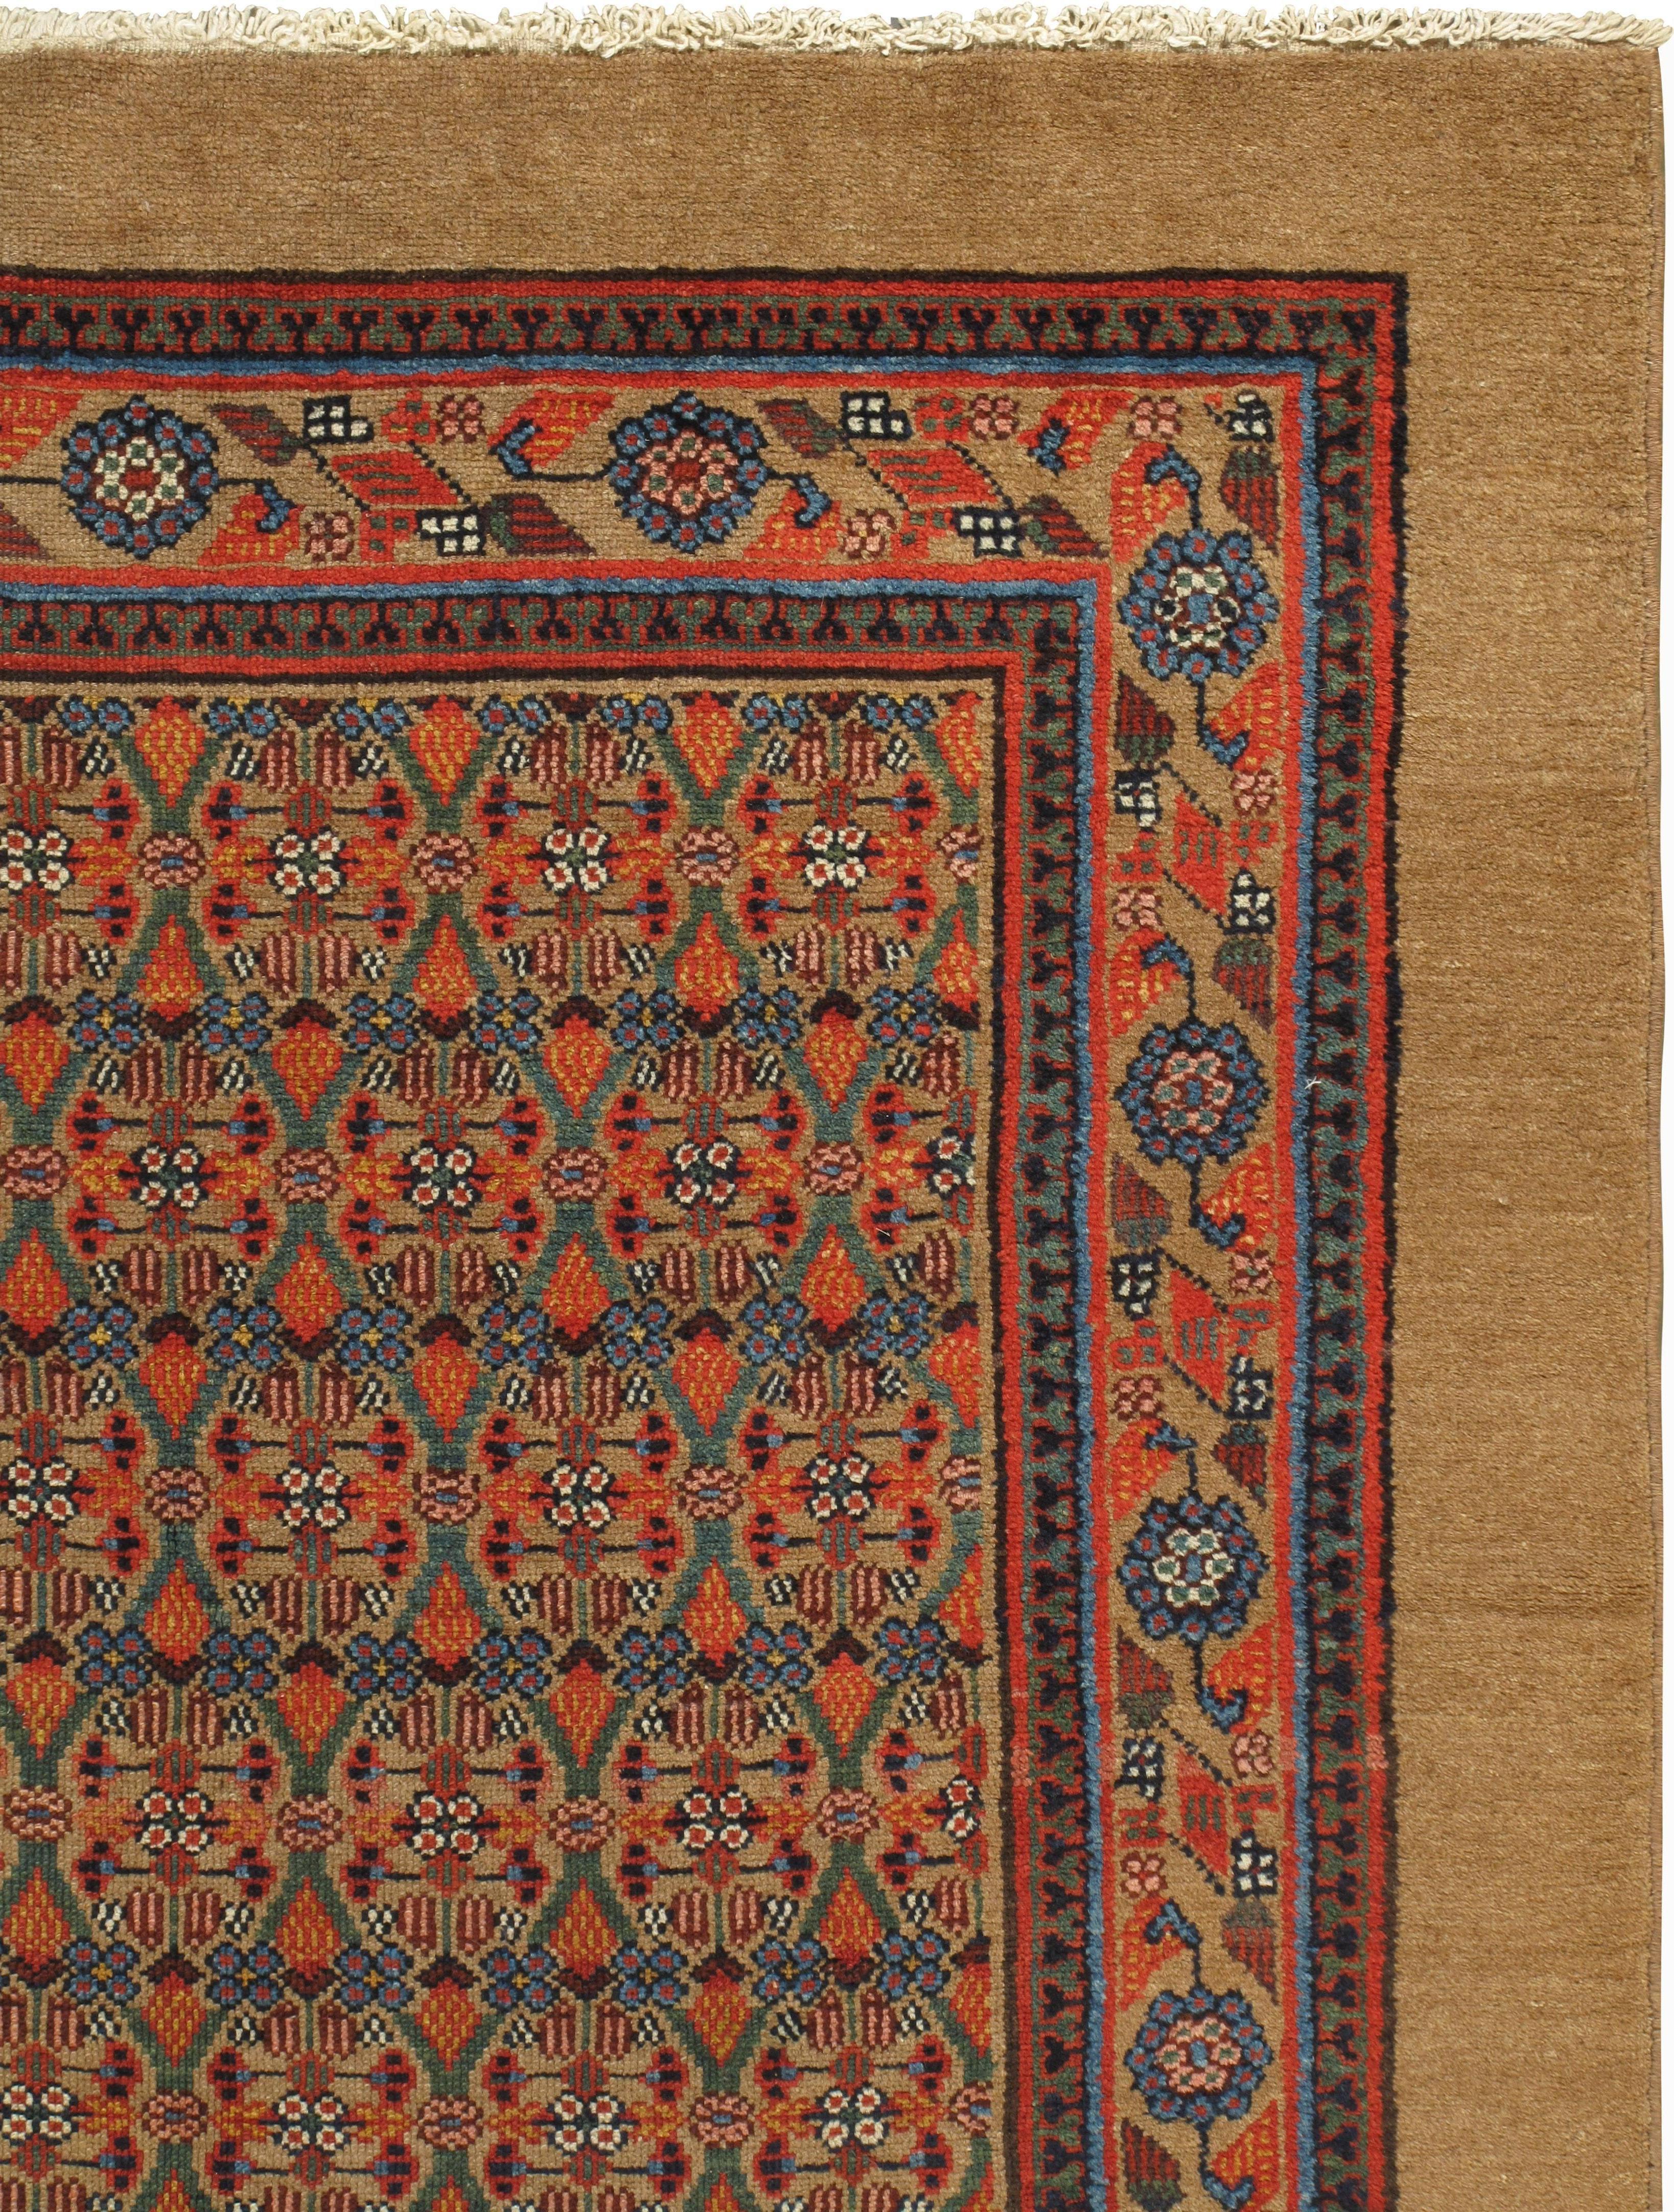 Antique Persian Serab camel hair runner, circa 1880. A delightful Serab runner, circa 1880. hand knotted using camel hair wool that creates a soft and lustrous look and feel to the rug. Serab rugs come from a small village in N.W. Persia very near